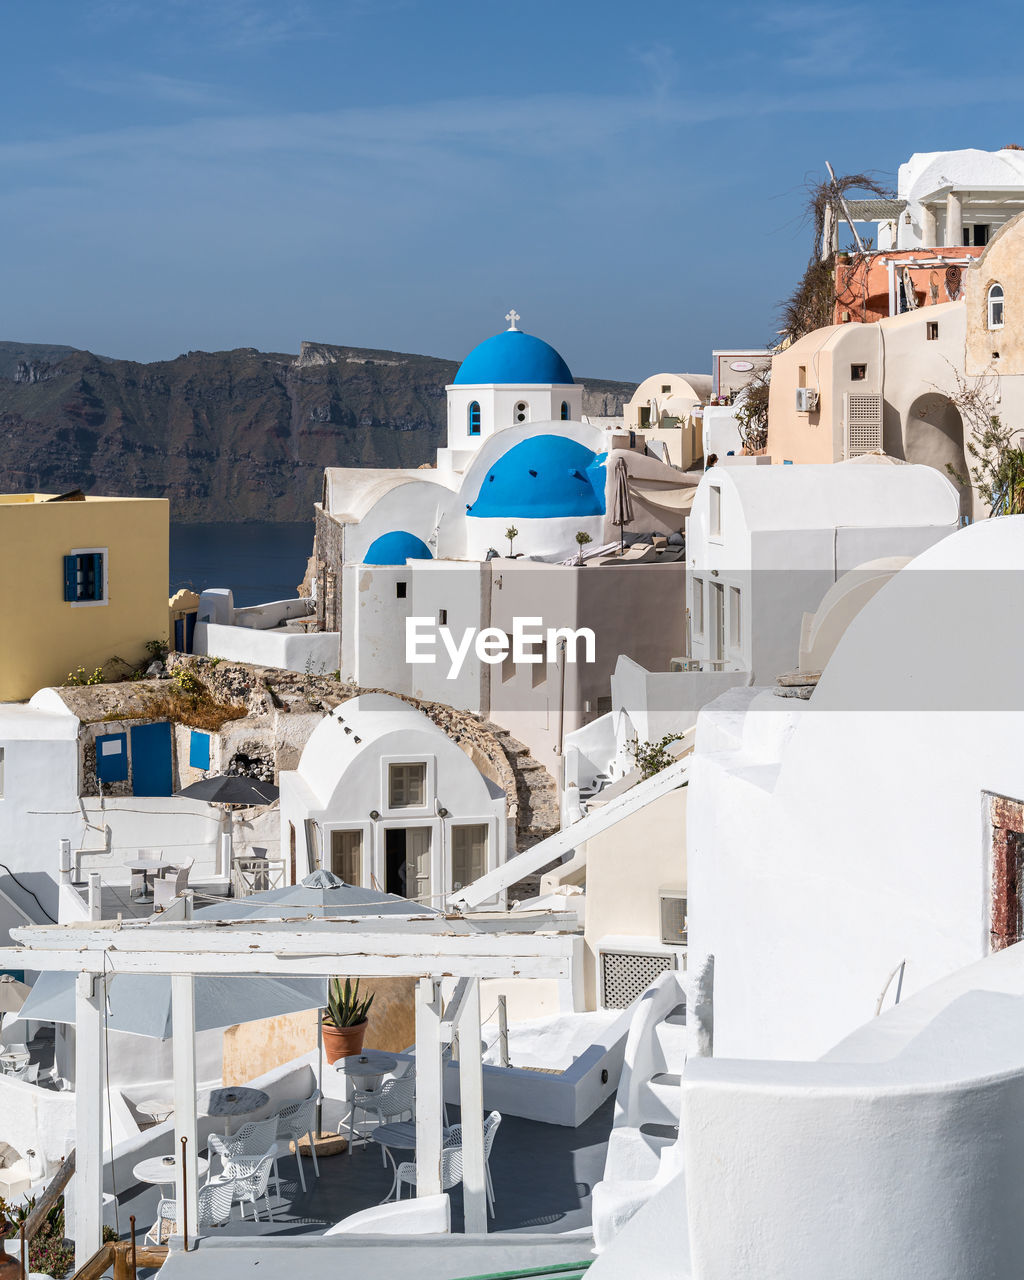 View of oia village in santorini with traditional white houses and blue domes churches, greece